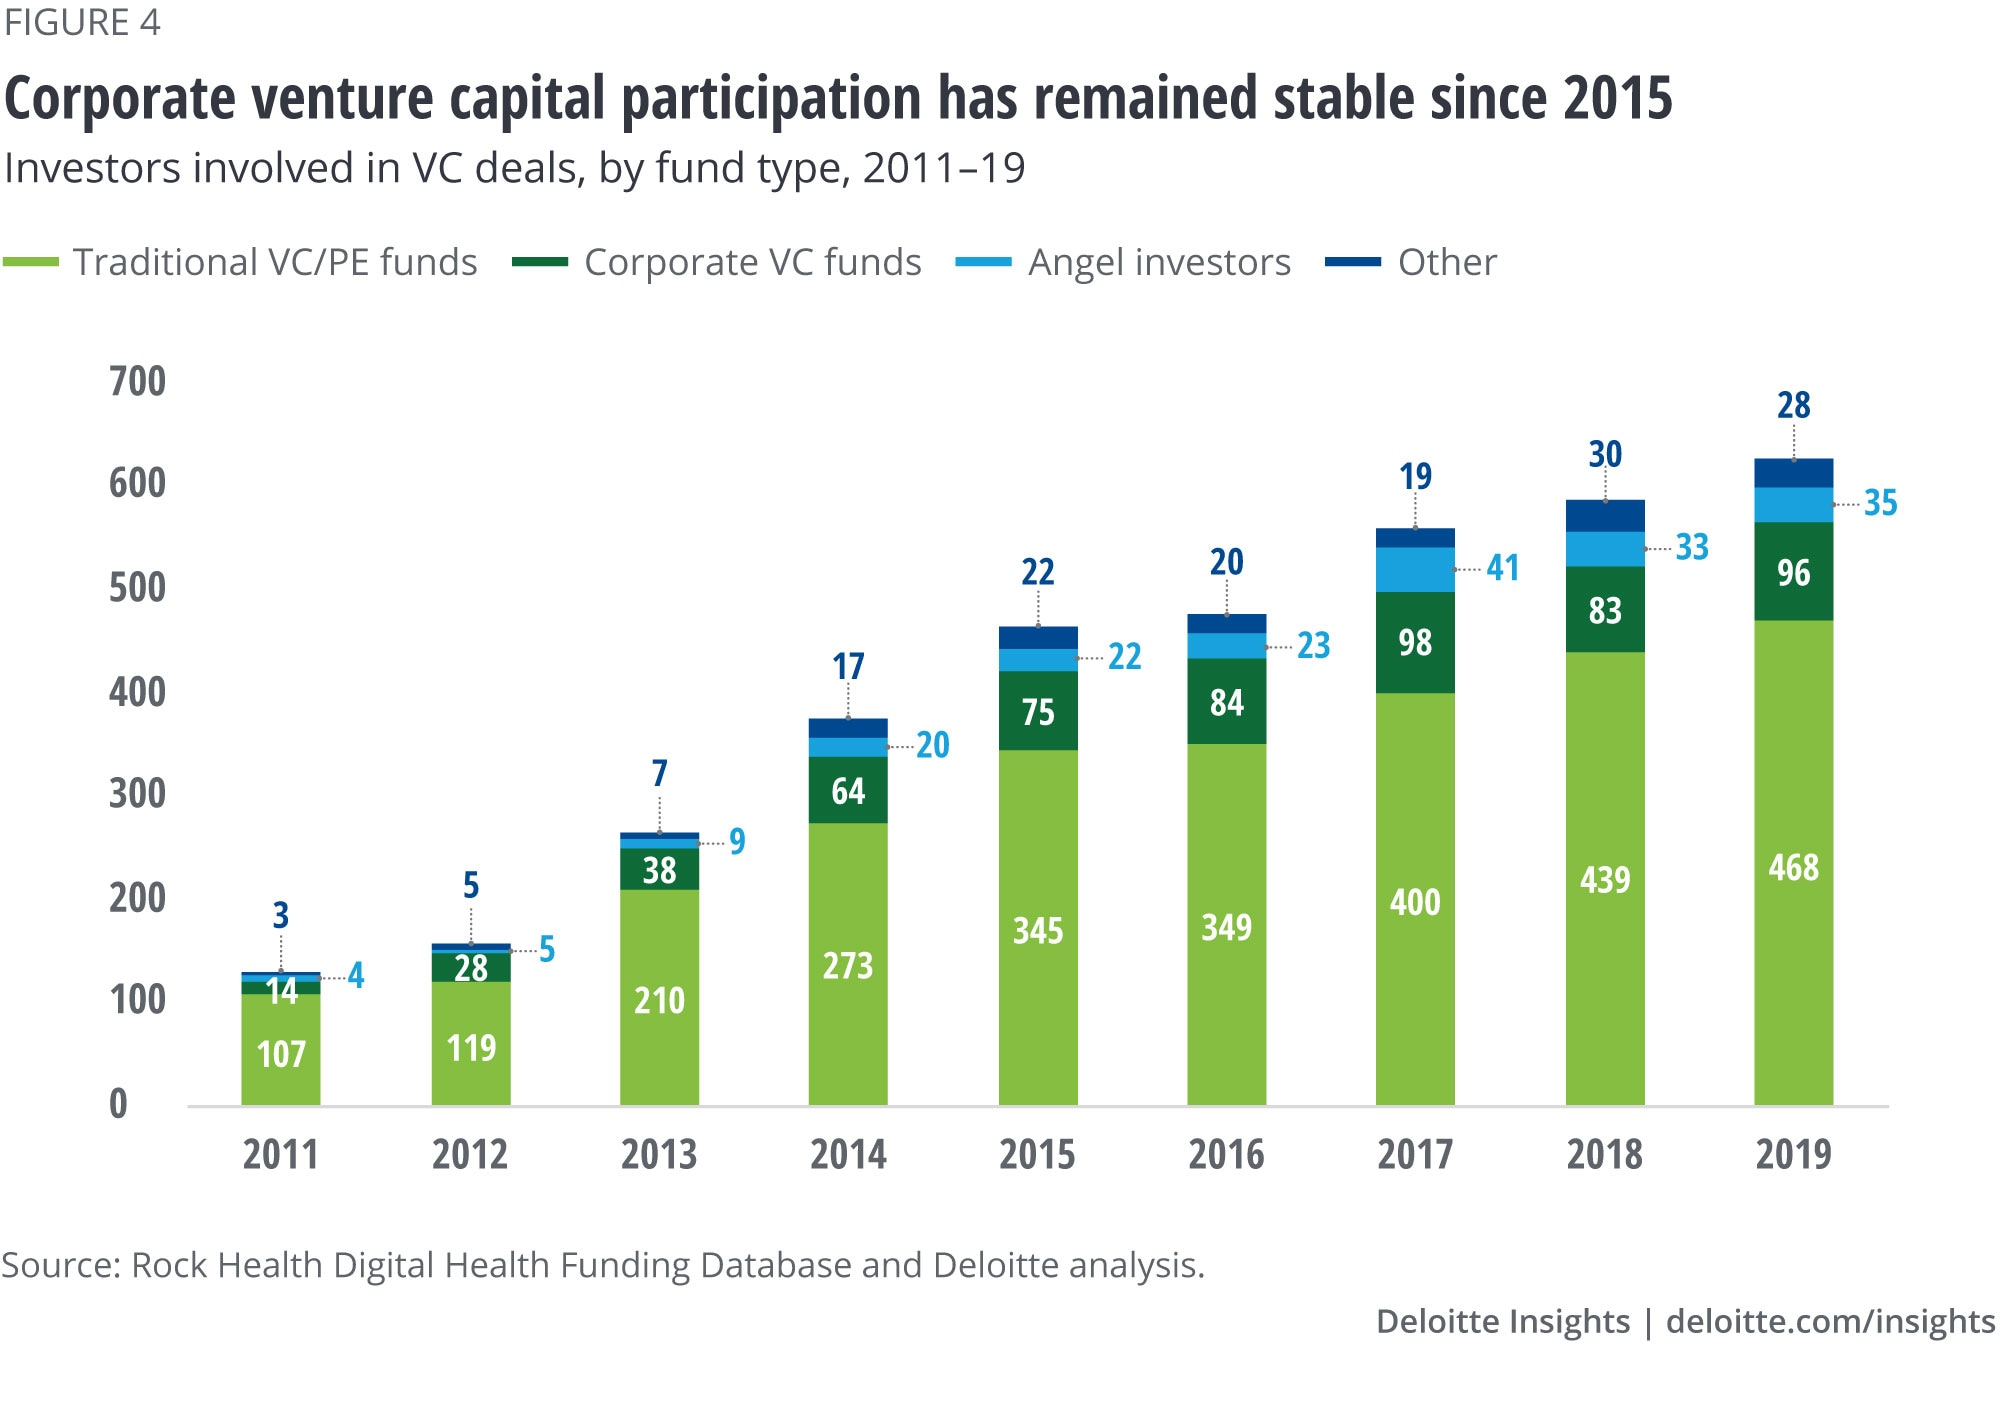 Participation of corporate venture capital groups has remained stable since 2015